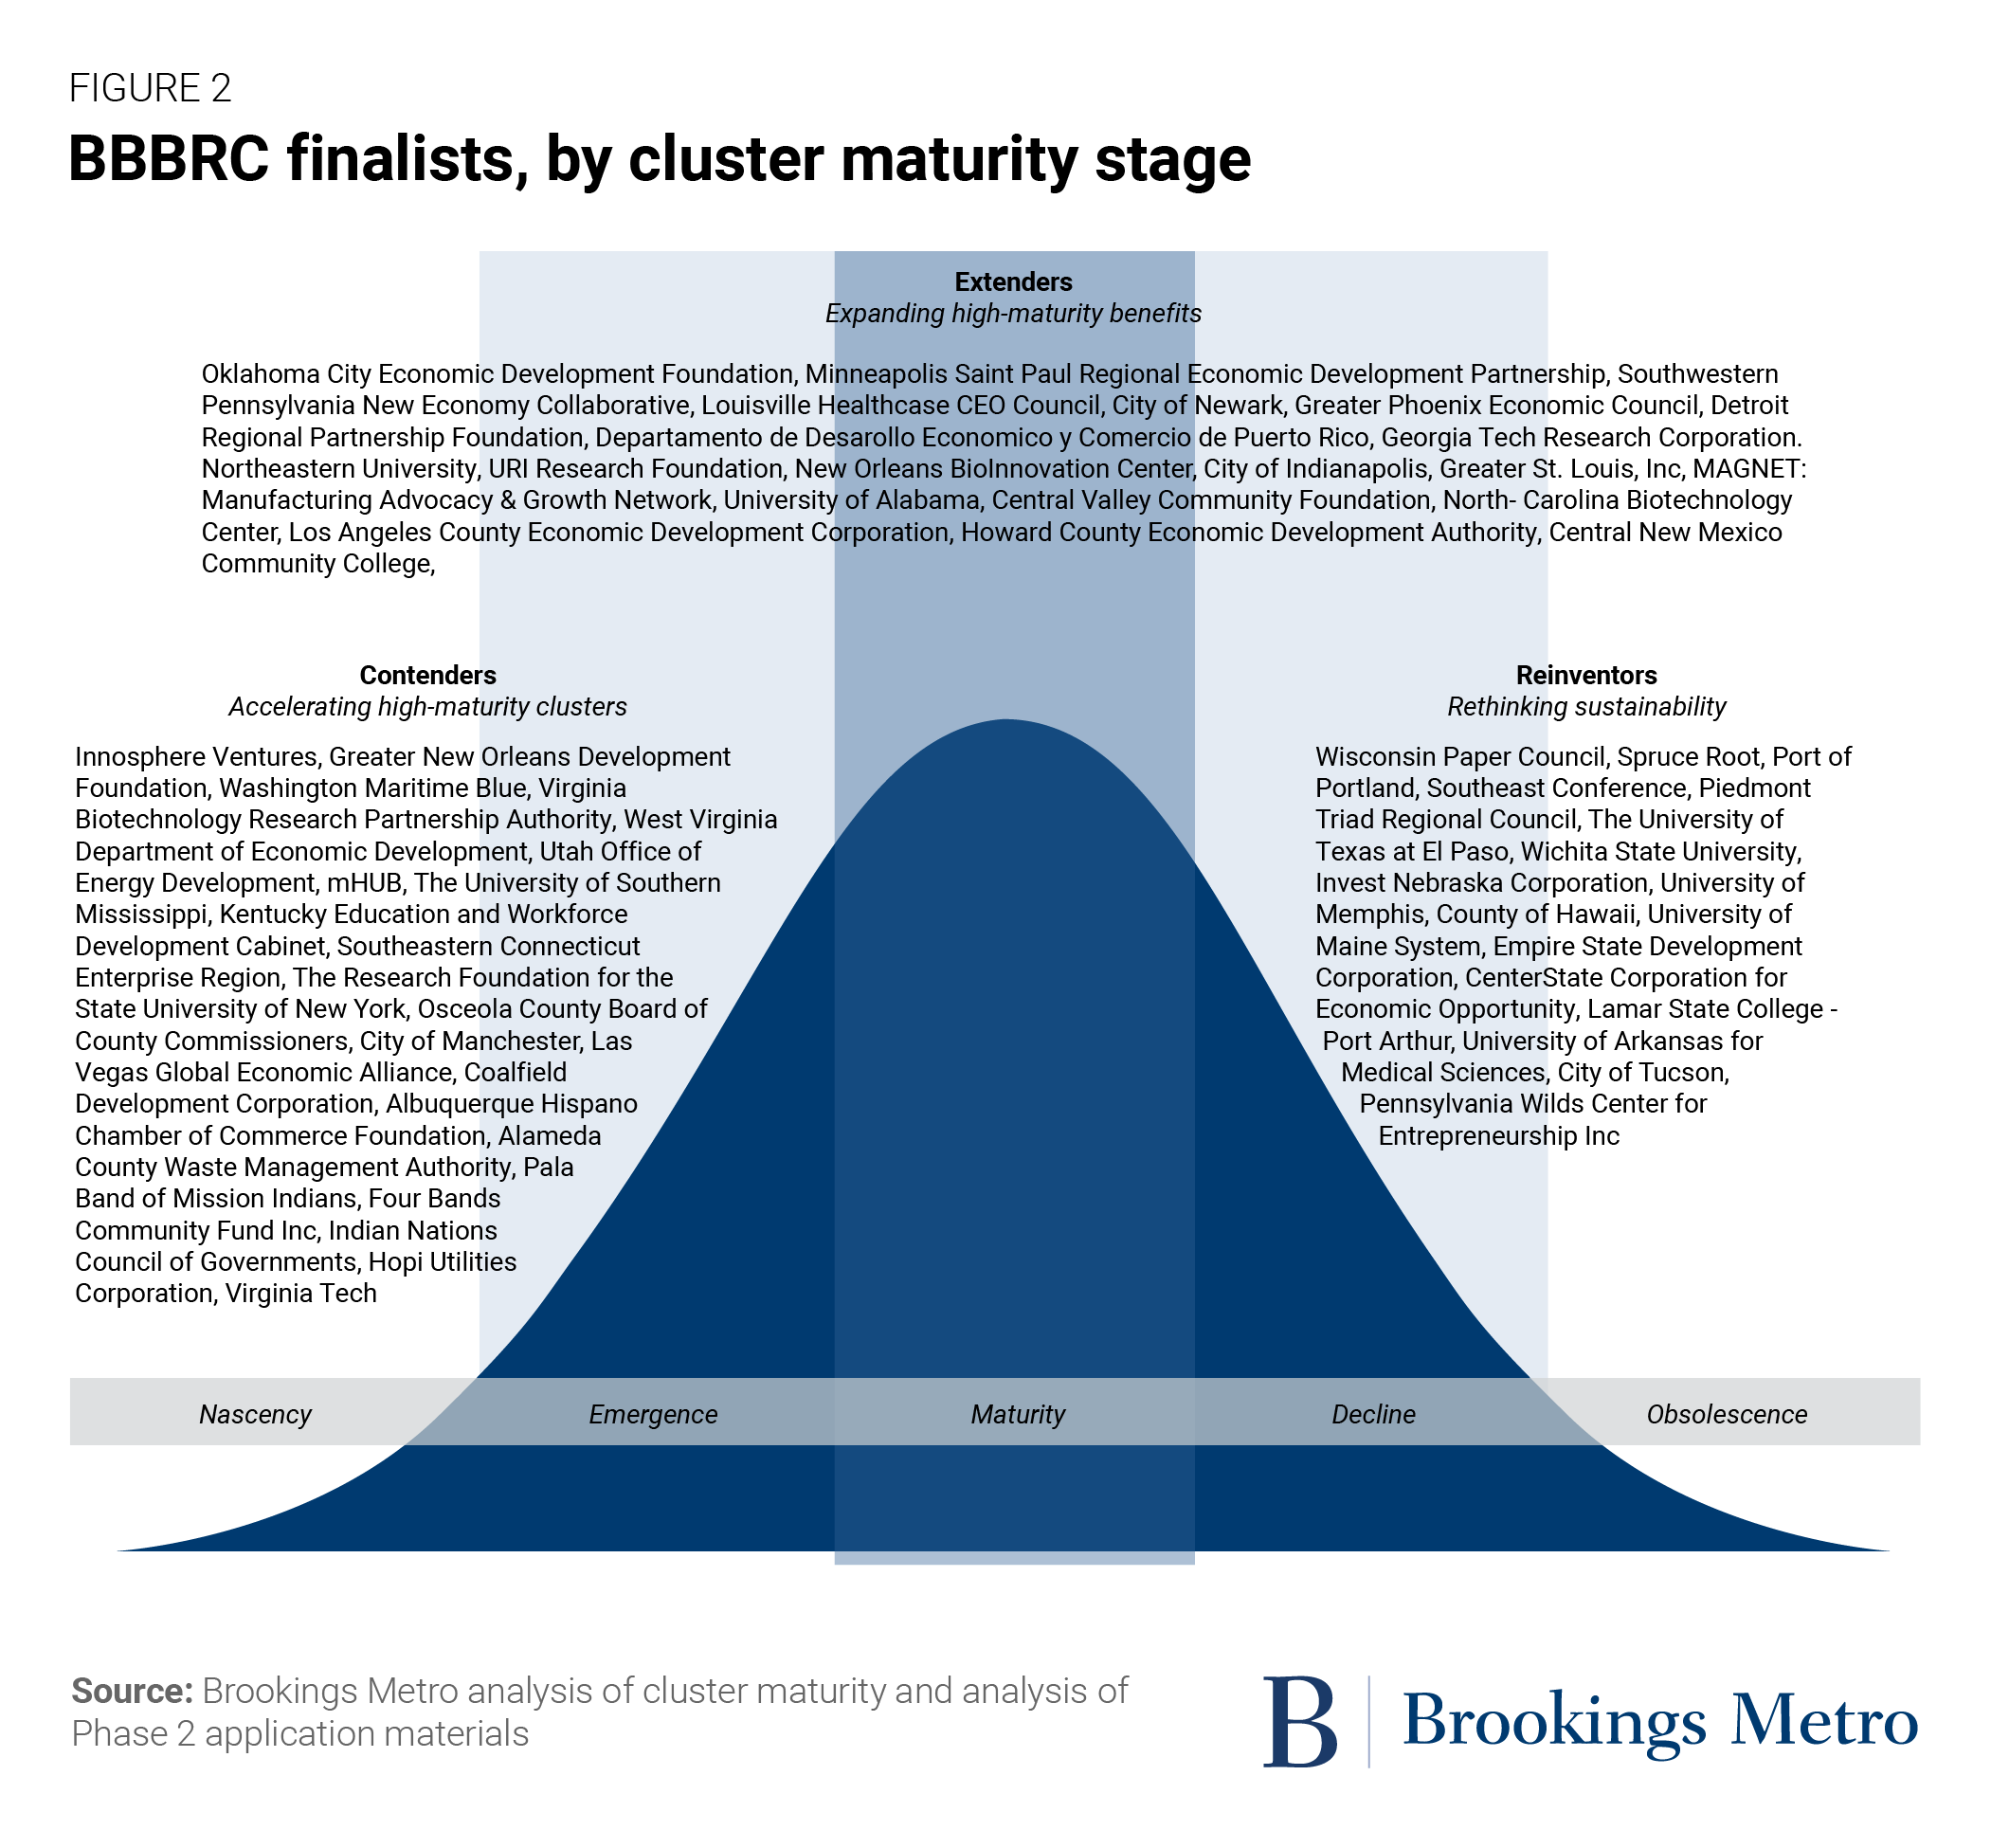 BBBRC finalists, by cluster maturity stage